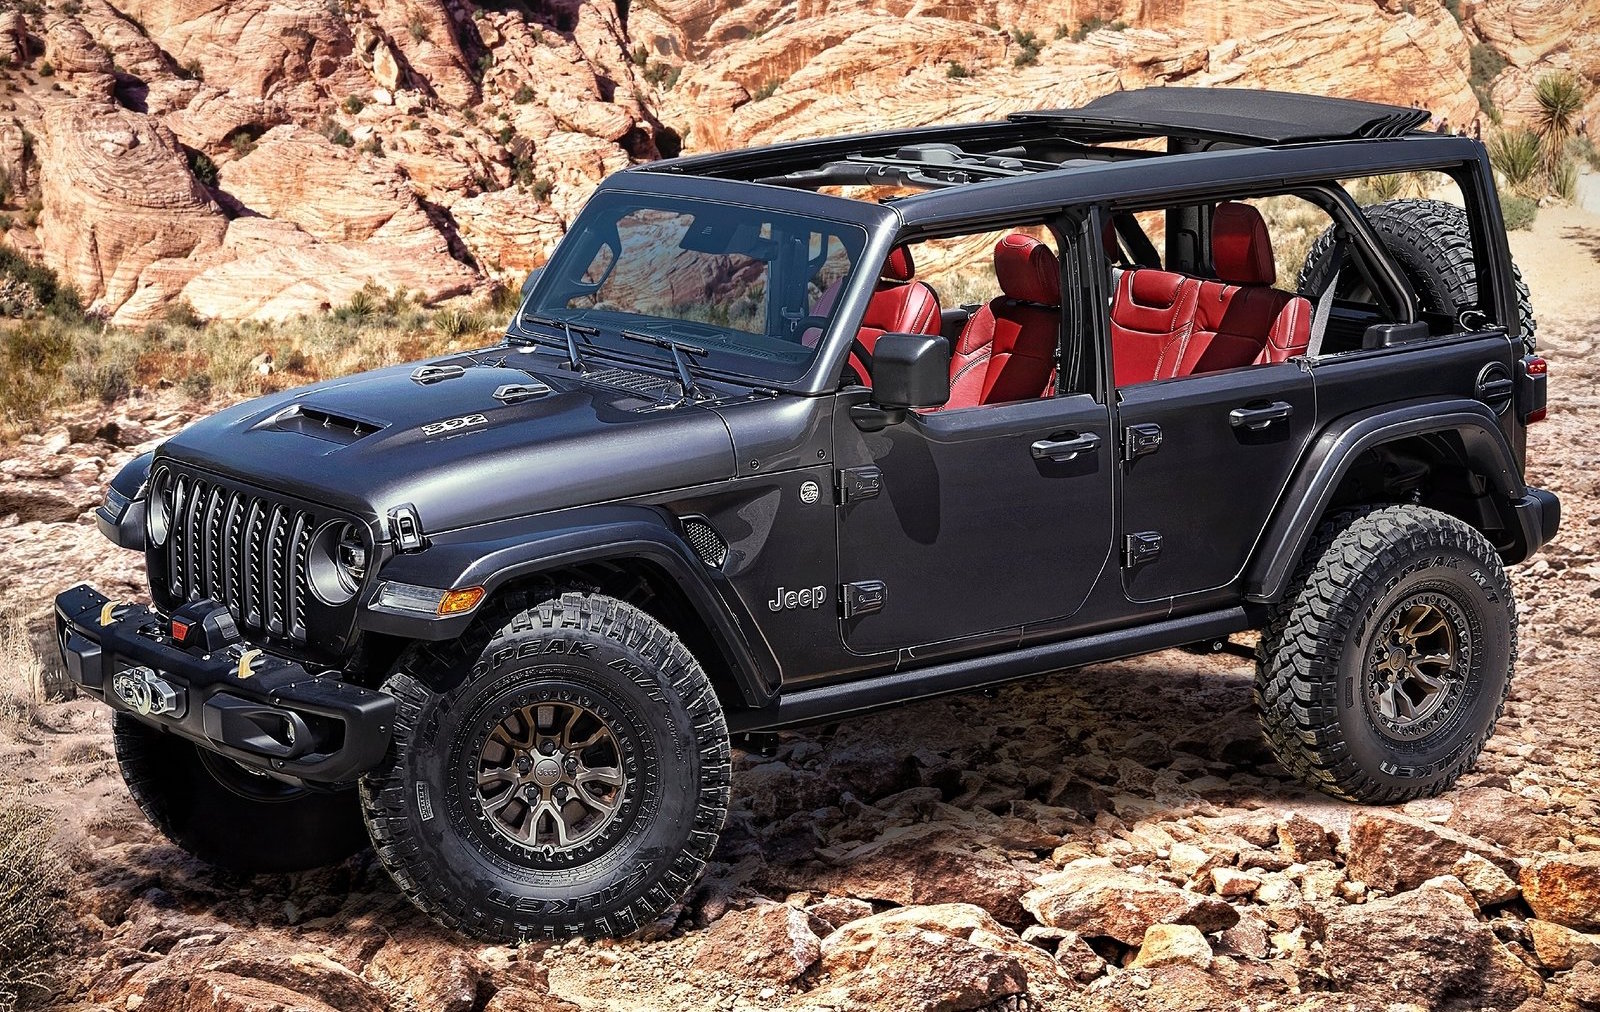 Jeep Wrangler Rubicon 392 Concept unveiled with V8 power